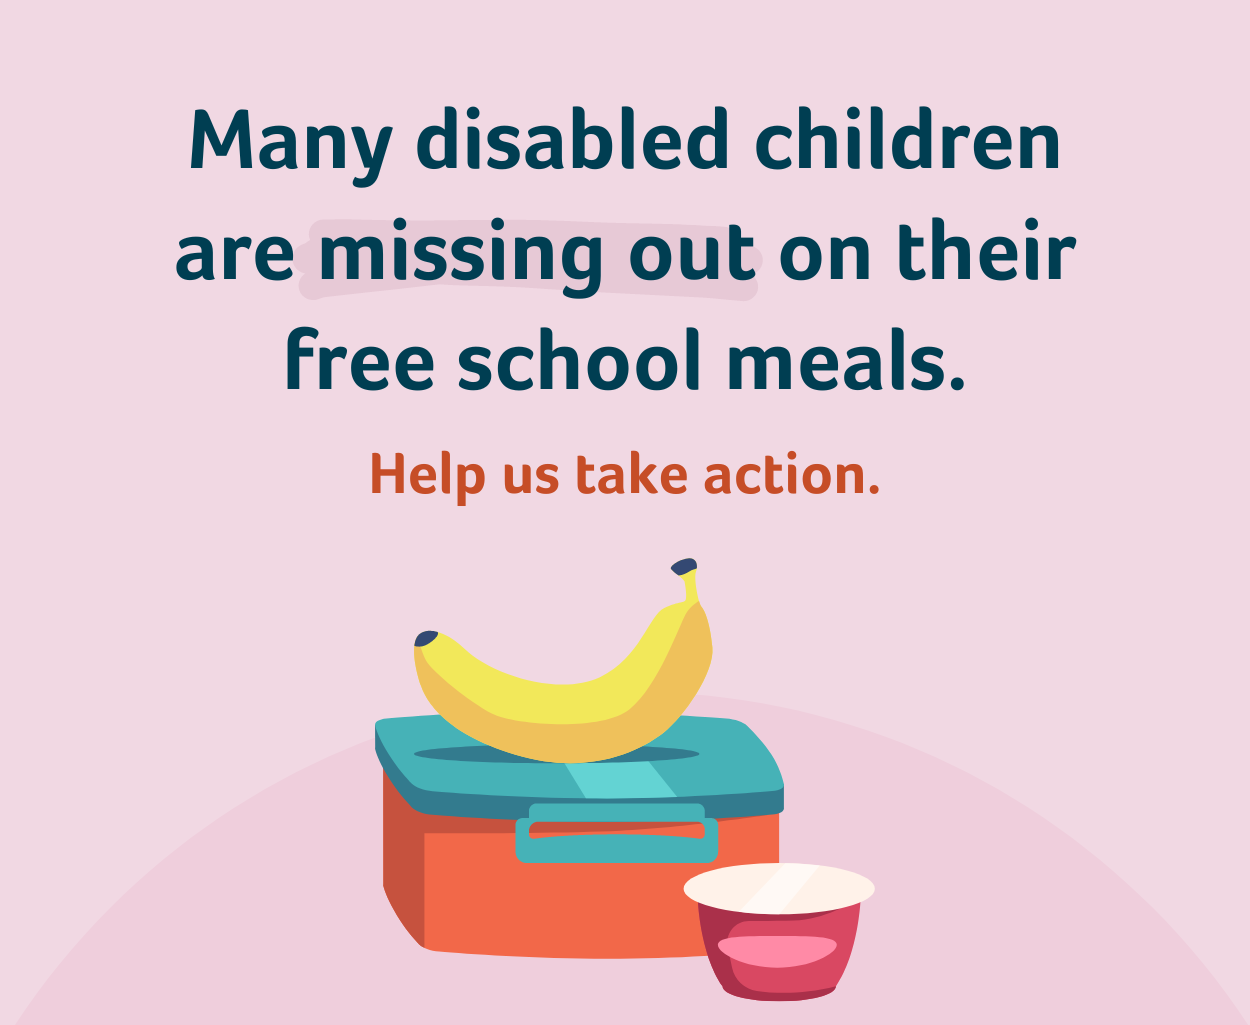 Many disabled children are missing out on their free school meals. Help us take action.